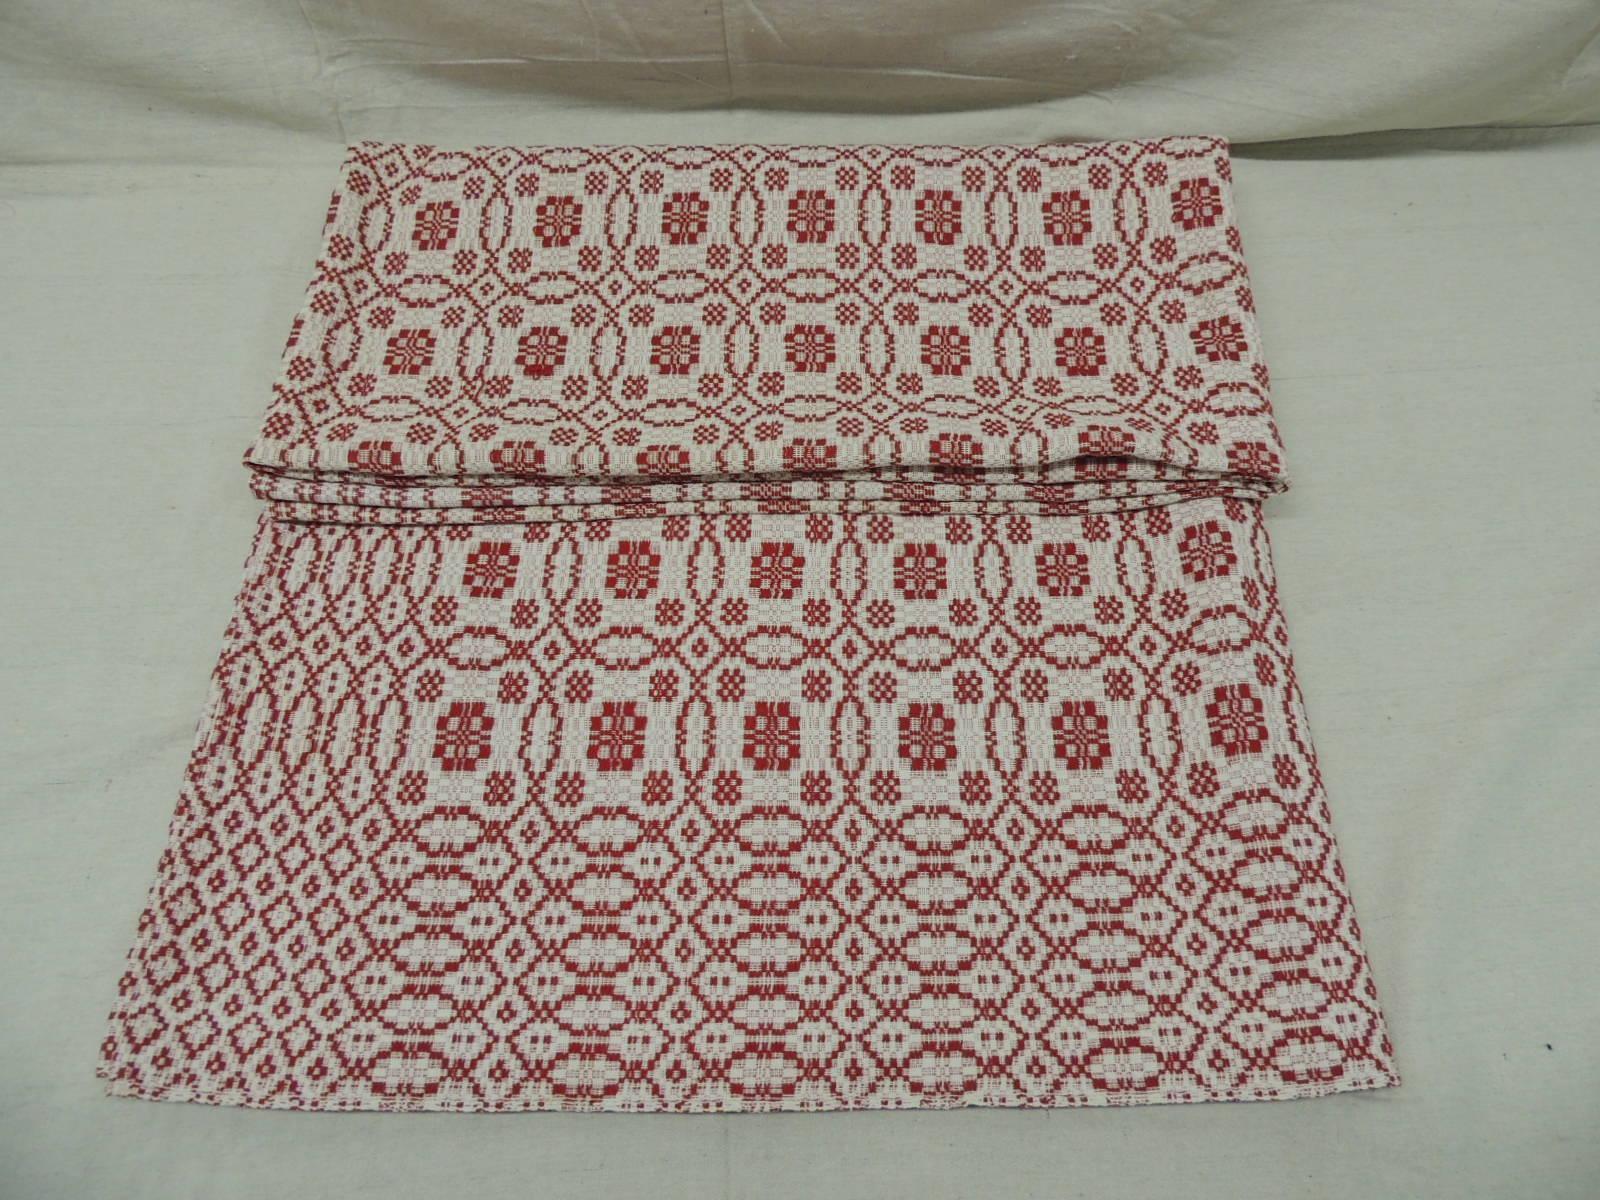 19th Century Red and White Americana Jacquard Woven Blanket/Coverlet